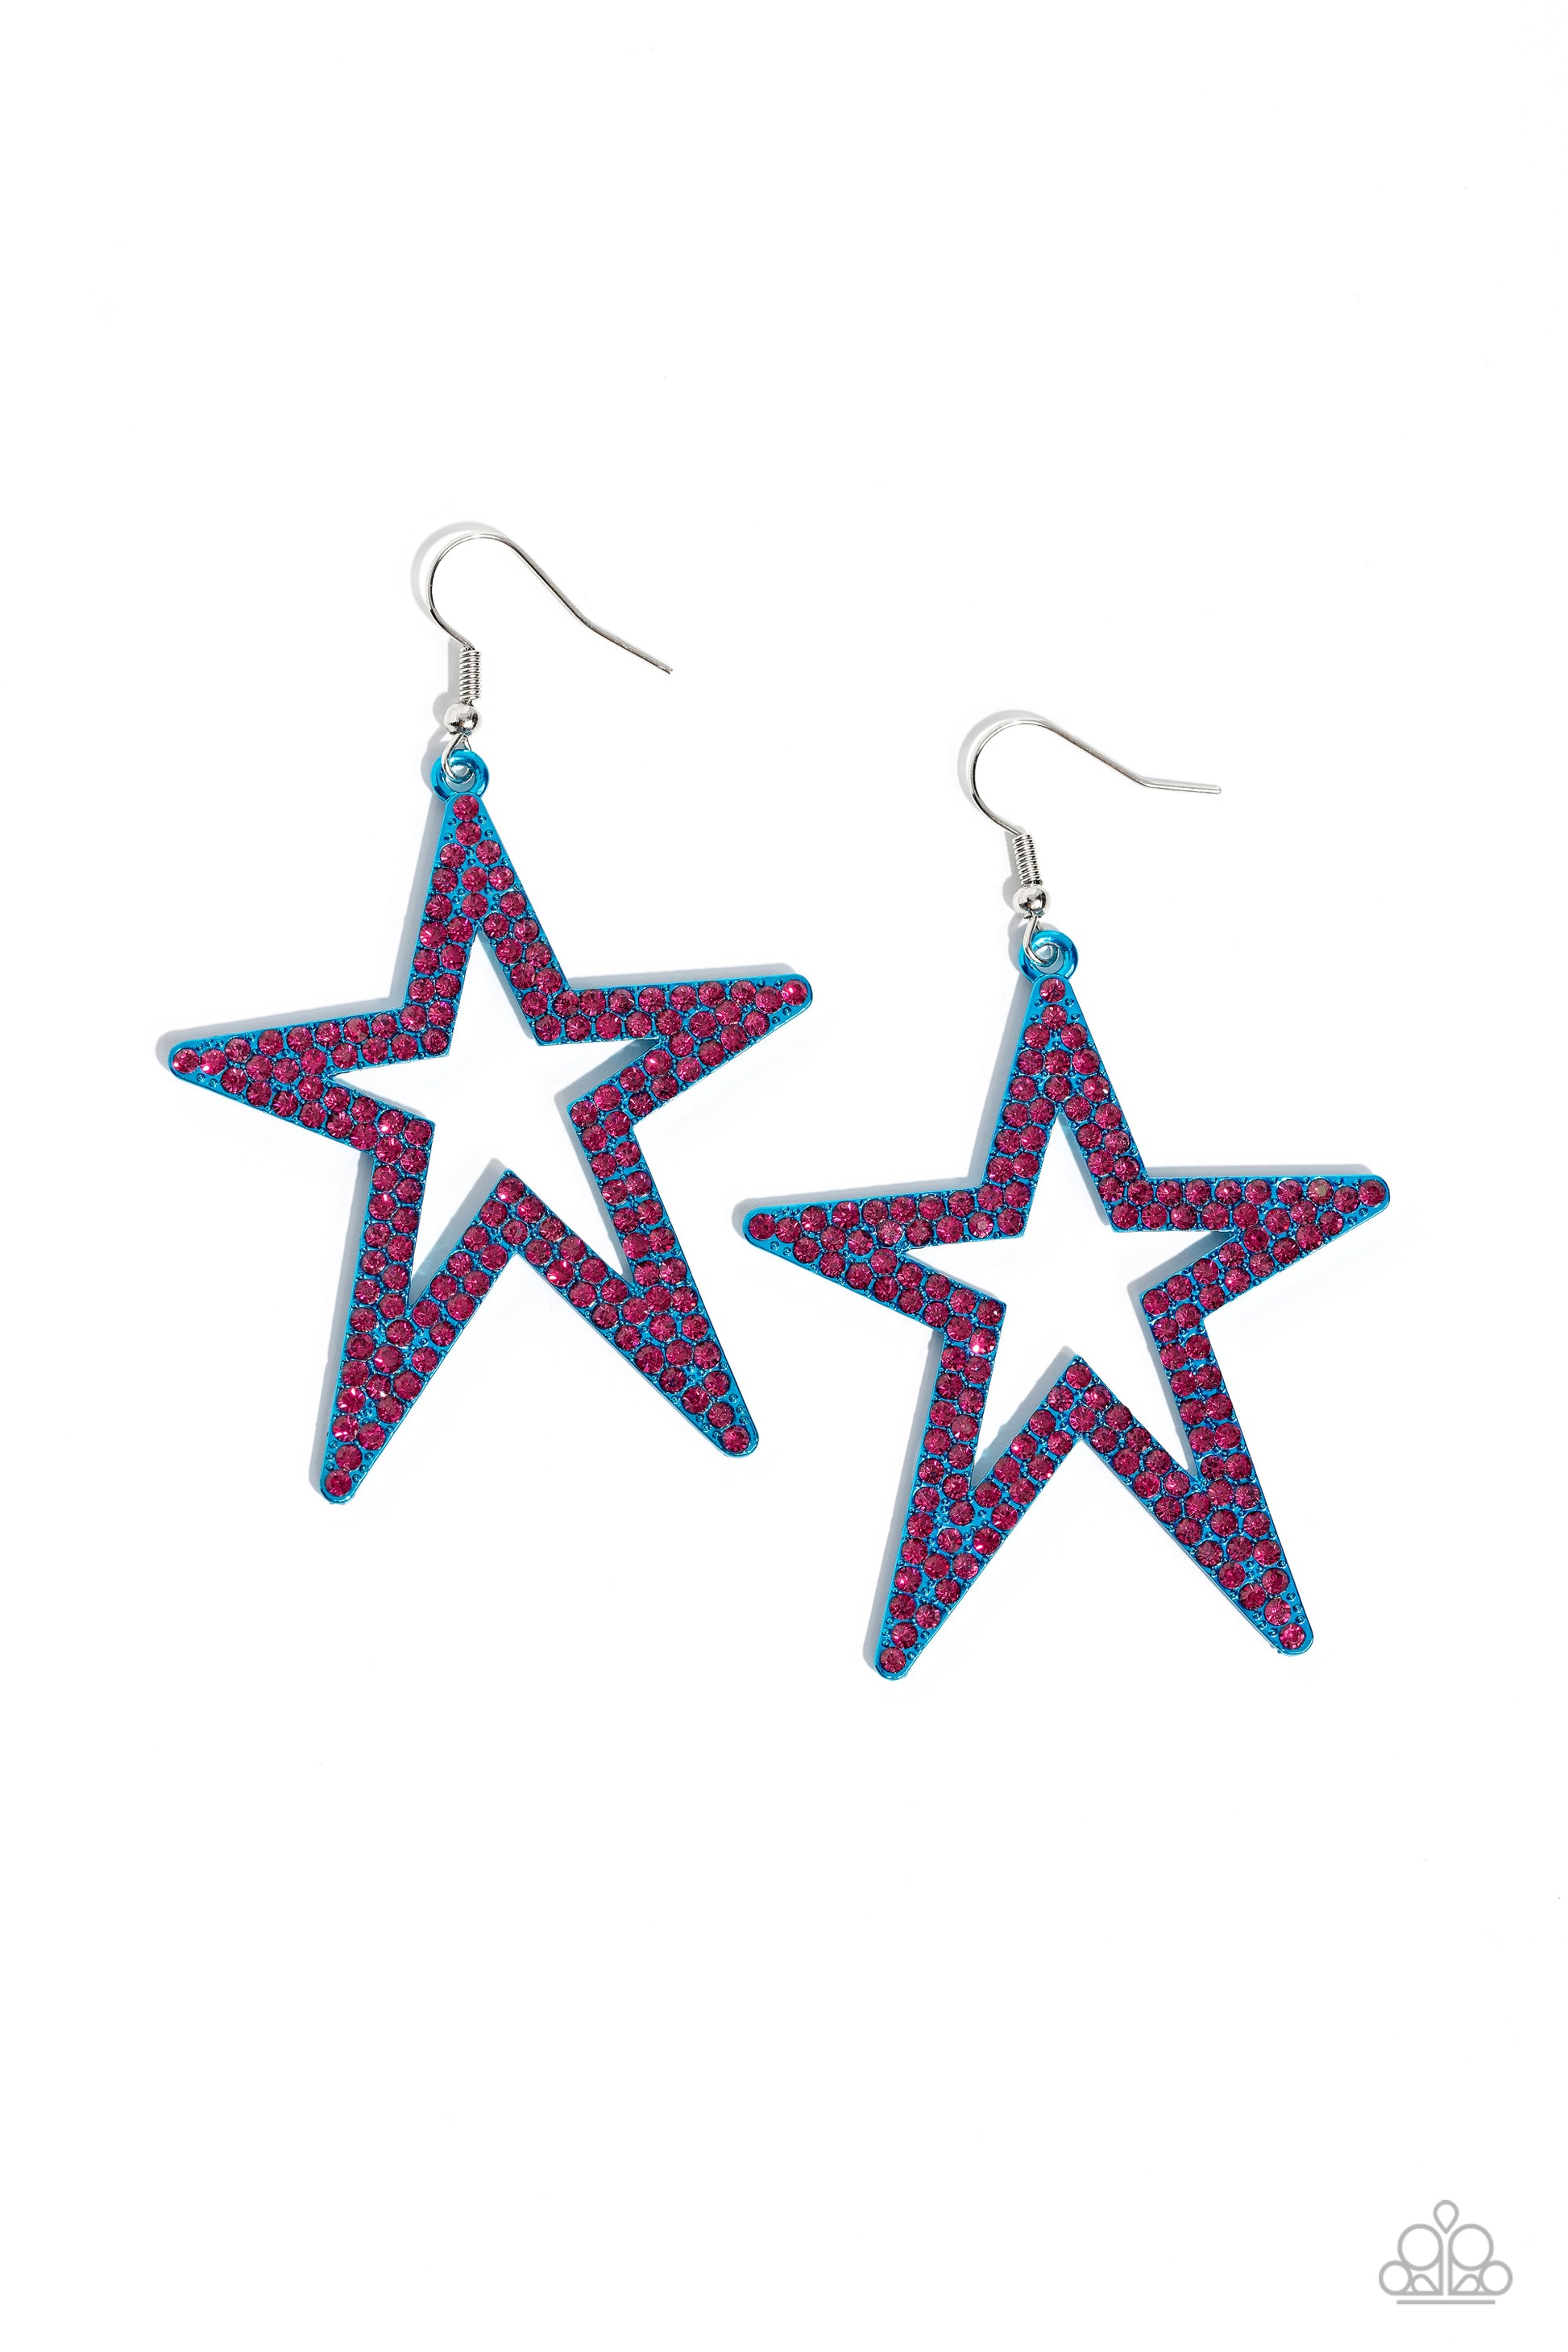 Rockstar Energy Blue Star Earring - Paparazzi Accessories  Double rows of fuchsia rhinestones adorn the front of an oversized blue metallic star silhouette, creating a stellar, sparkling centerpiece. Earring attaches to a standard fishhook fitting.  Sold as one pair of earrings.  P5ST-BLXX-048XX